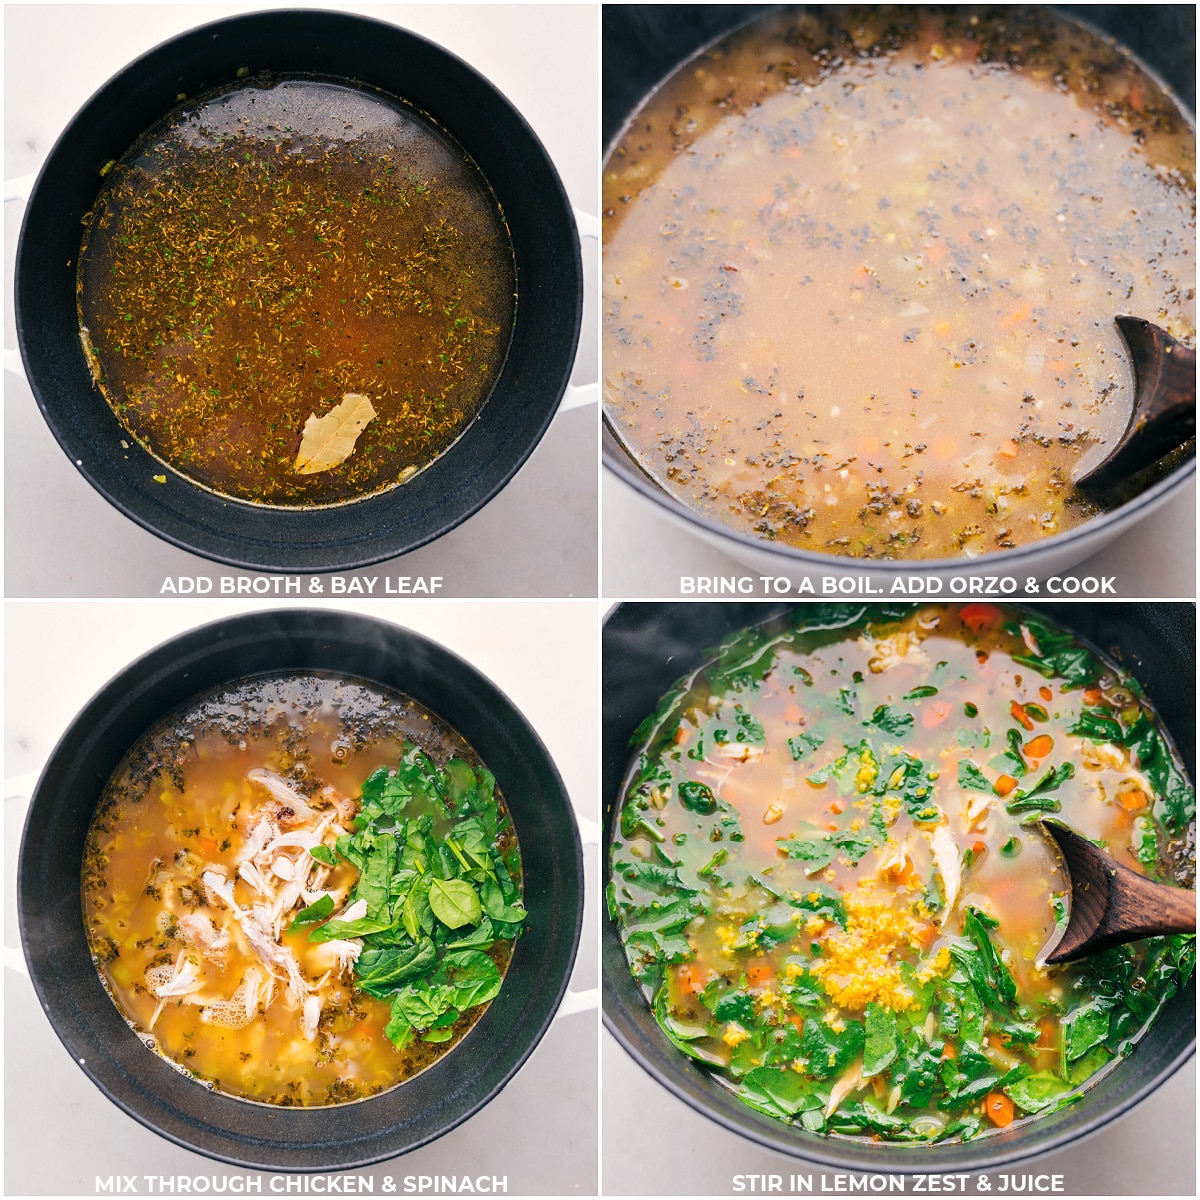 Incorporating bay leaf and stock into the pot, followed by the addition of chicken, spinach, and lemon juice and zest for making a delicious and warming dinner.